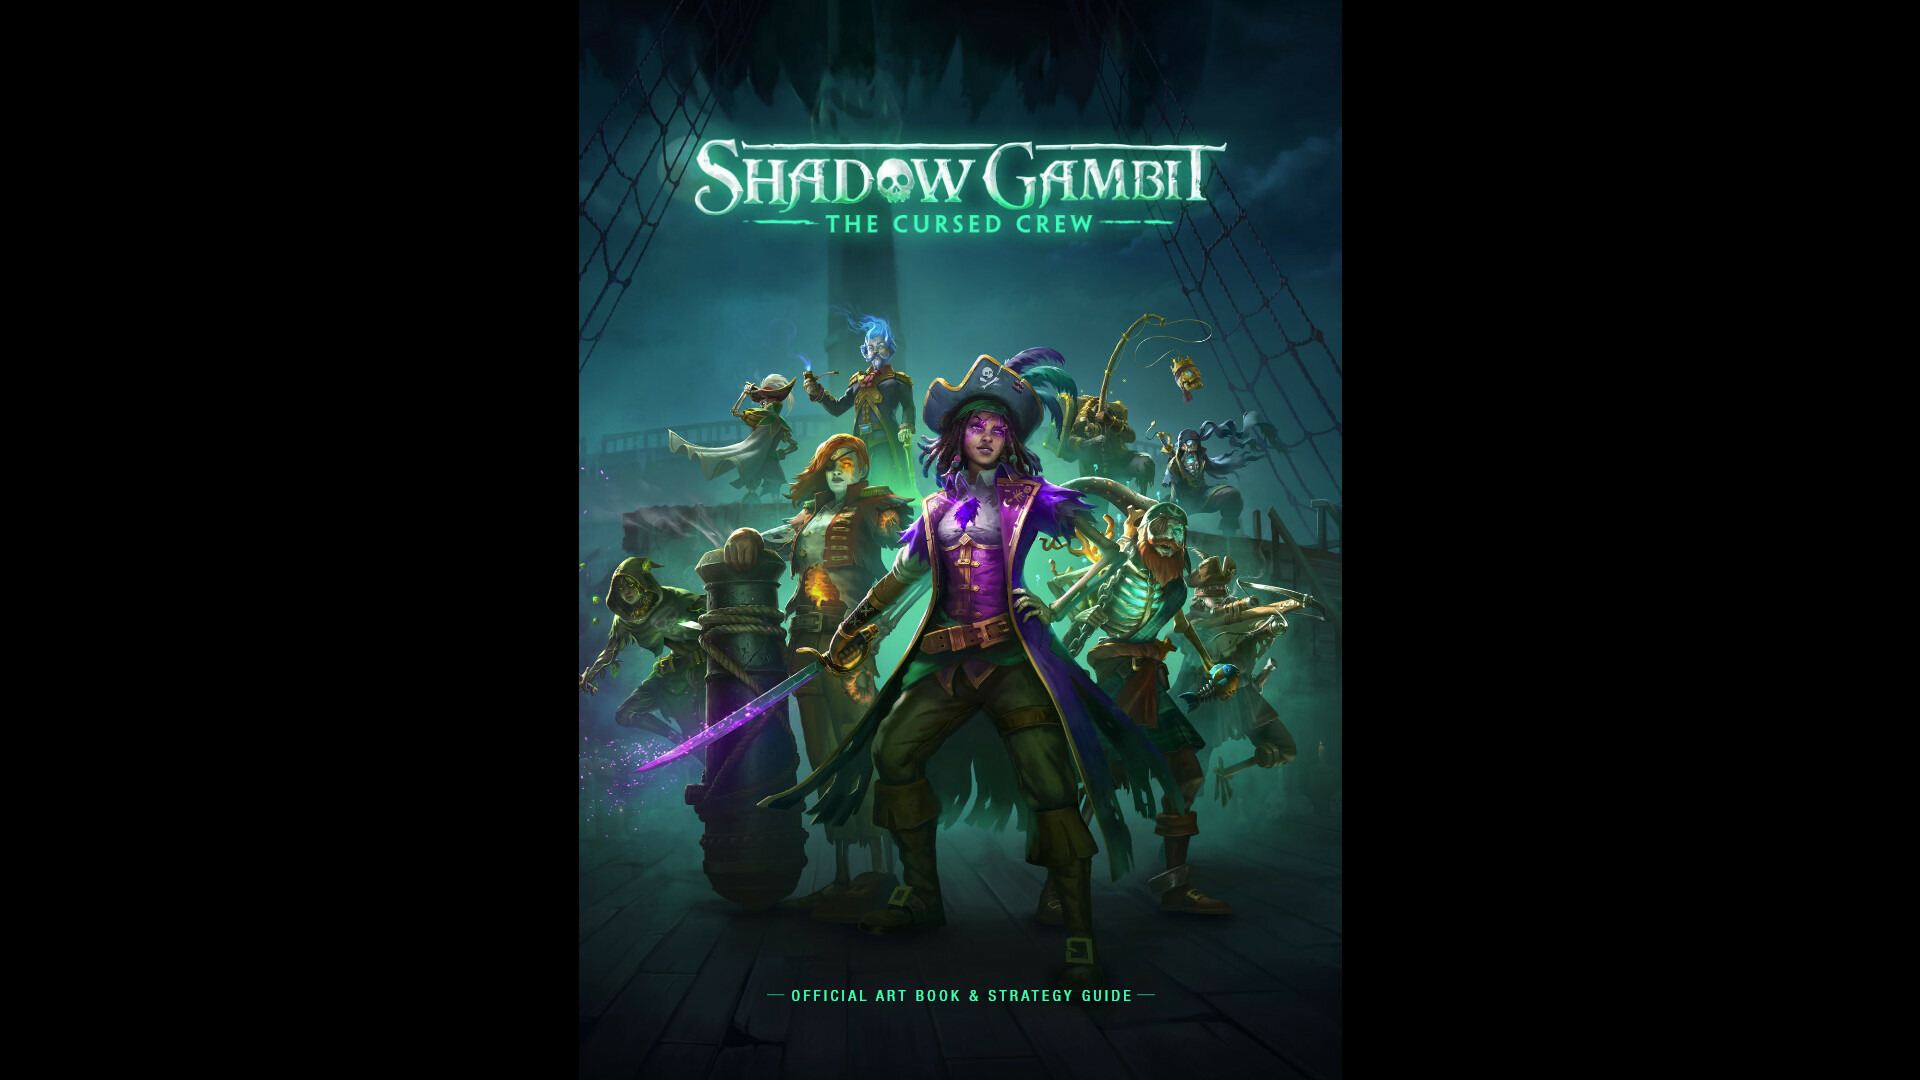 Shadow Gambit: The Cursed Crew Supporter Edition Epic Games Account [USD 31.53]